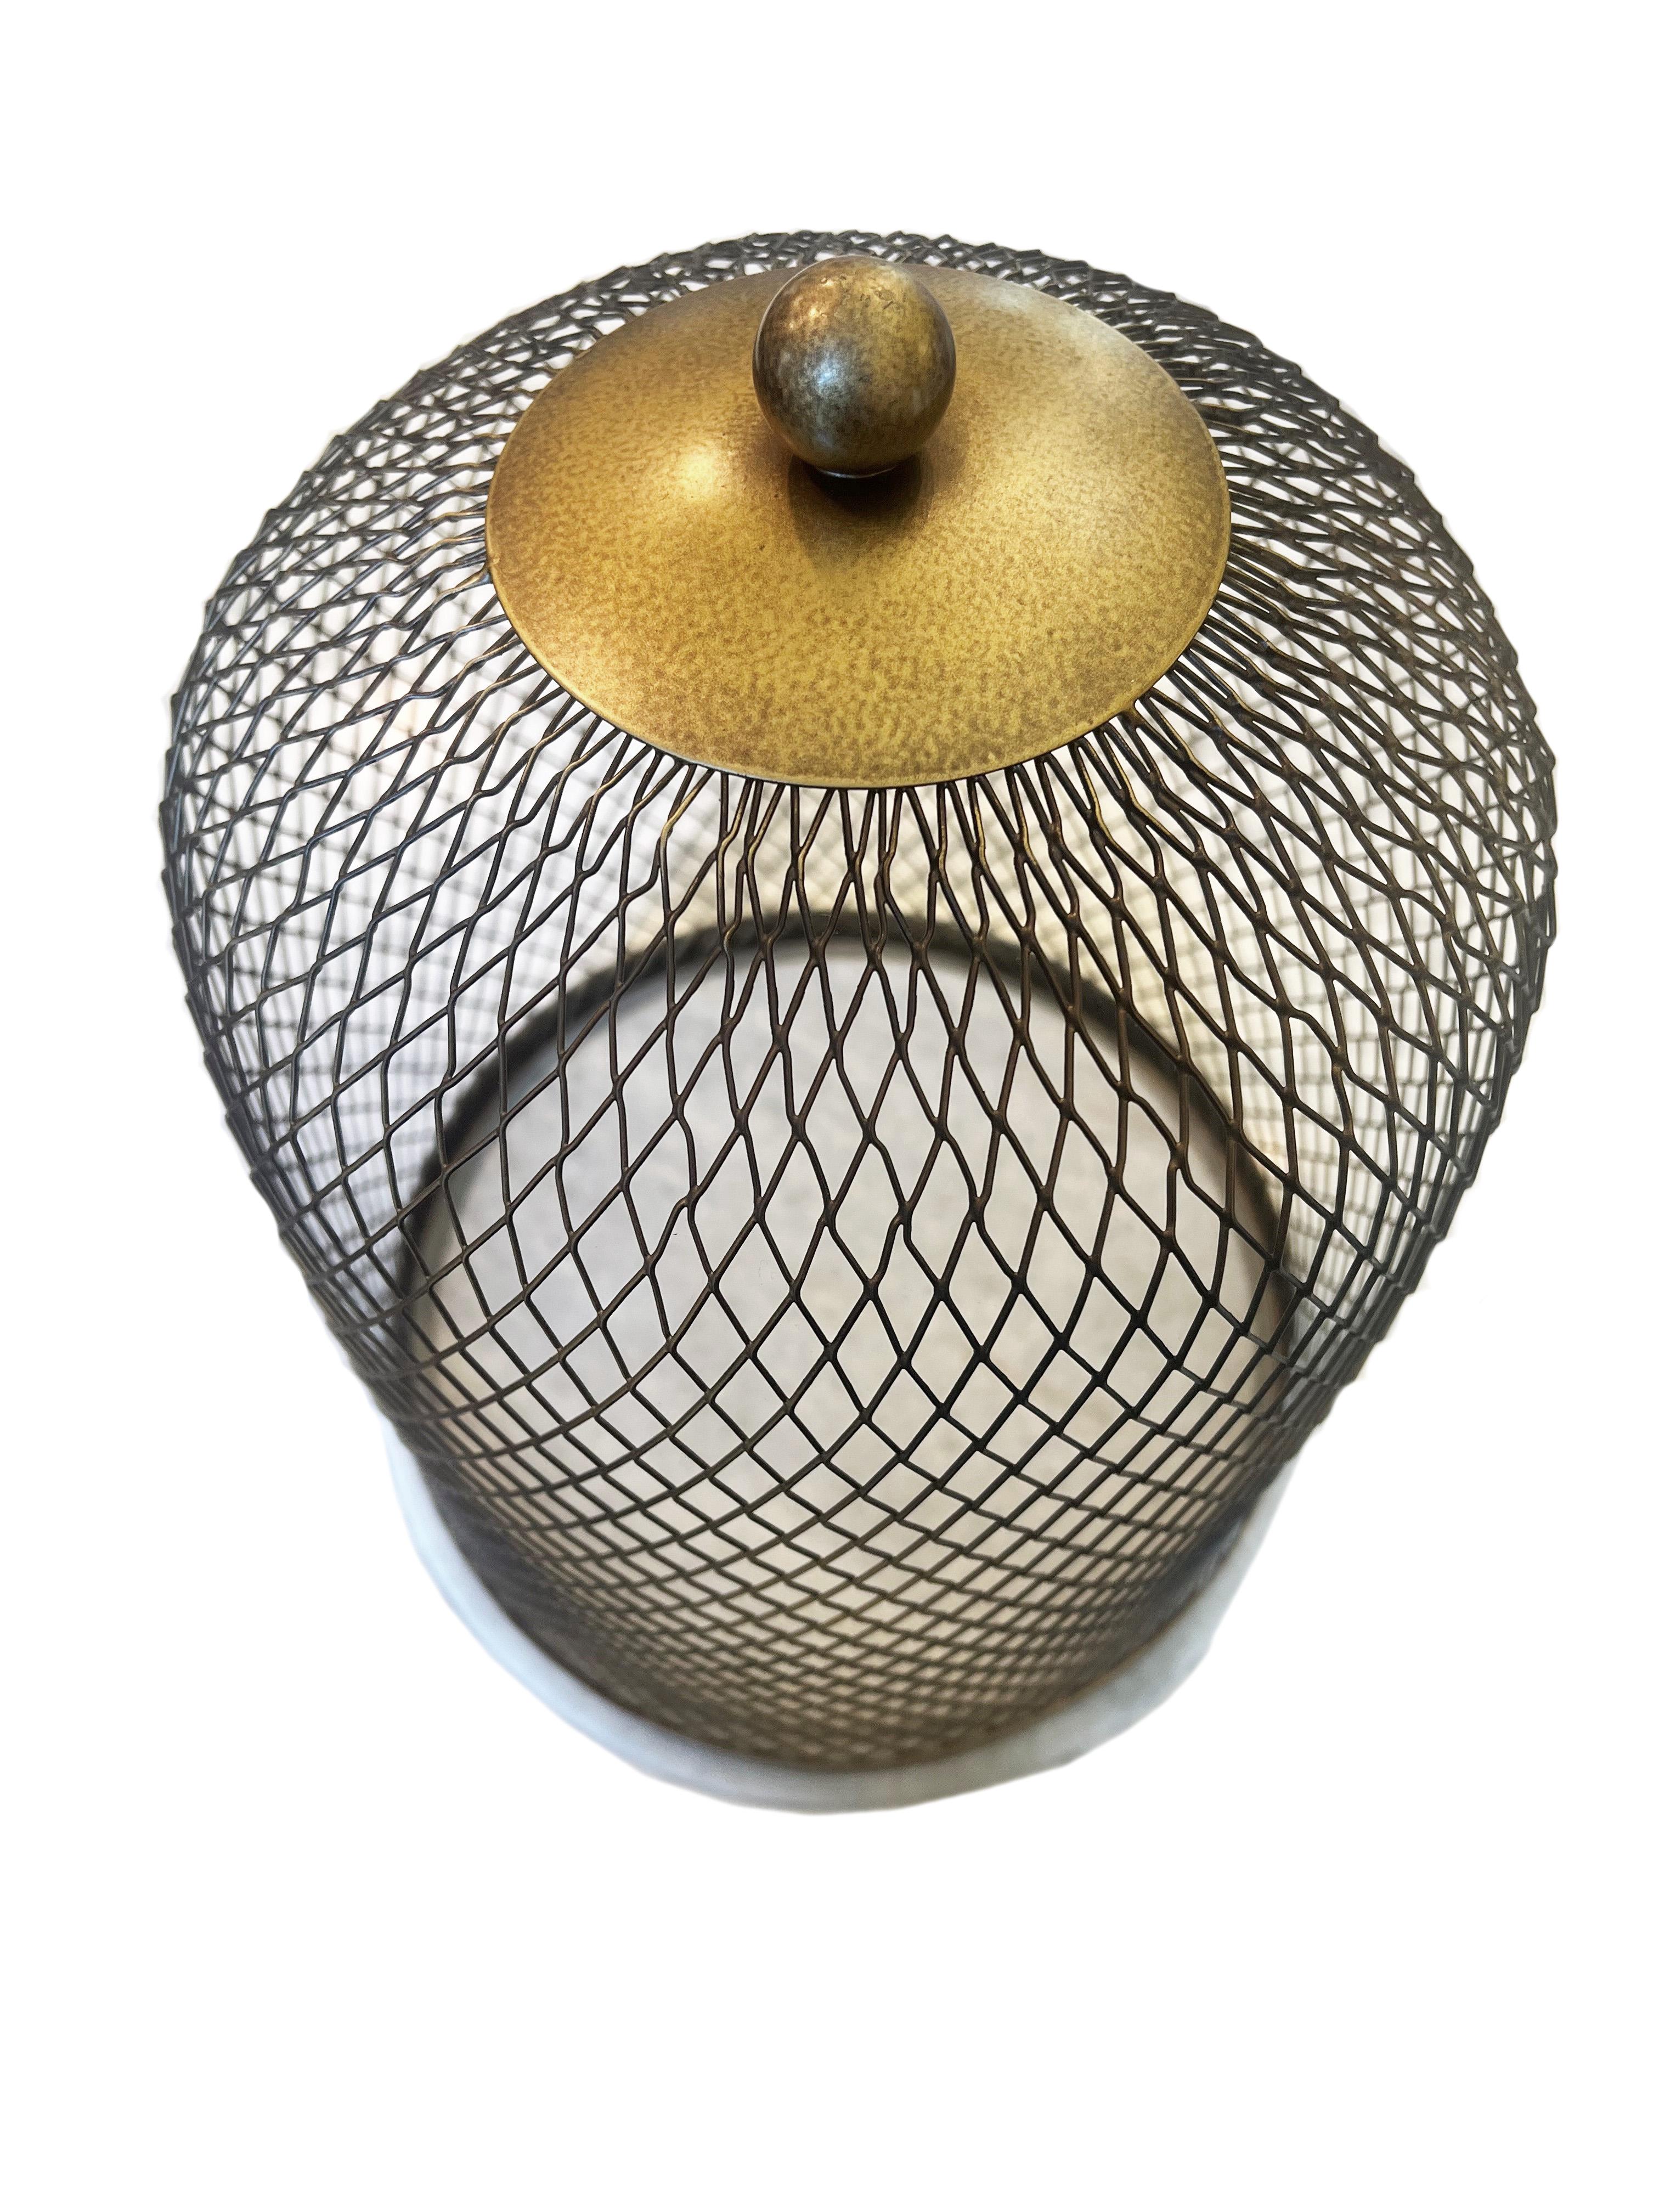 Elevate your home decor with this exquisite iron mesh cloche, presenting a harmonious blend of utility and elegance. The cloche features a sophisticated antique brass finish that exudes a warm, vintage charm, perfectly complemented by its luxurious